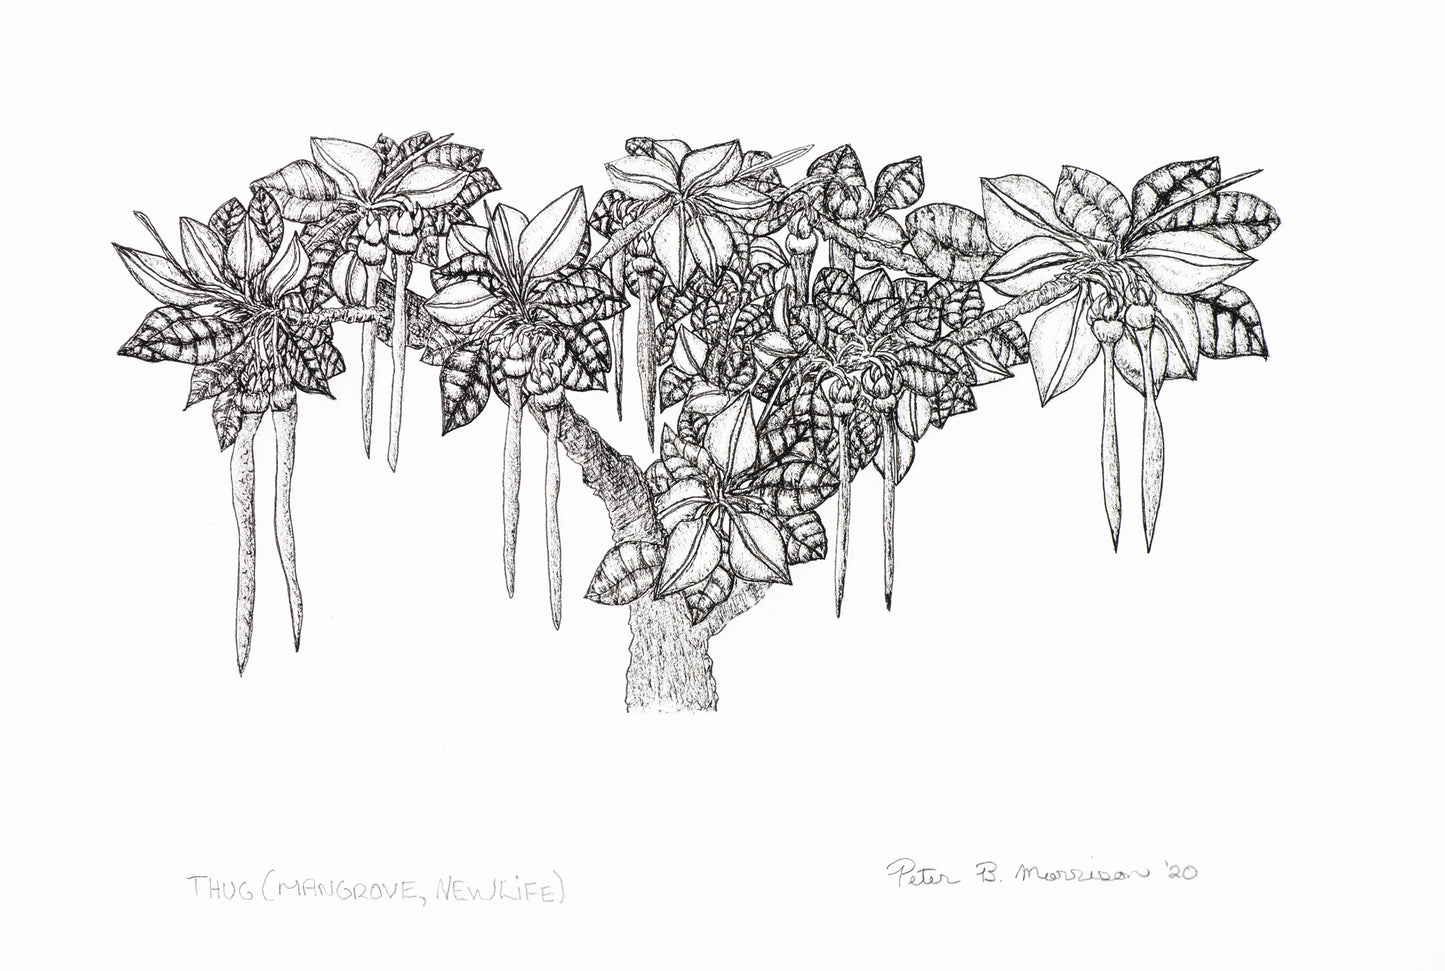 PETER B MORRISON | 'Thag' (Mangrove, New Life) Drawing | Pen and ink on archival paper